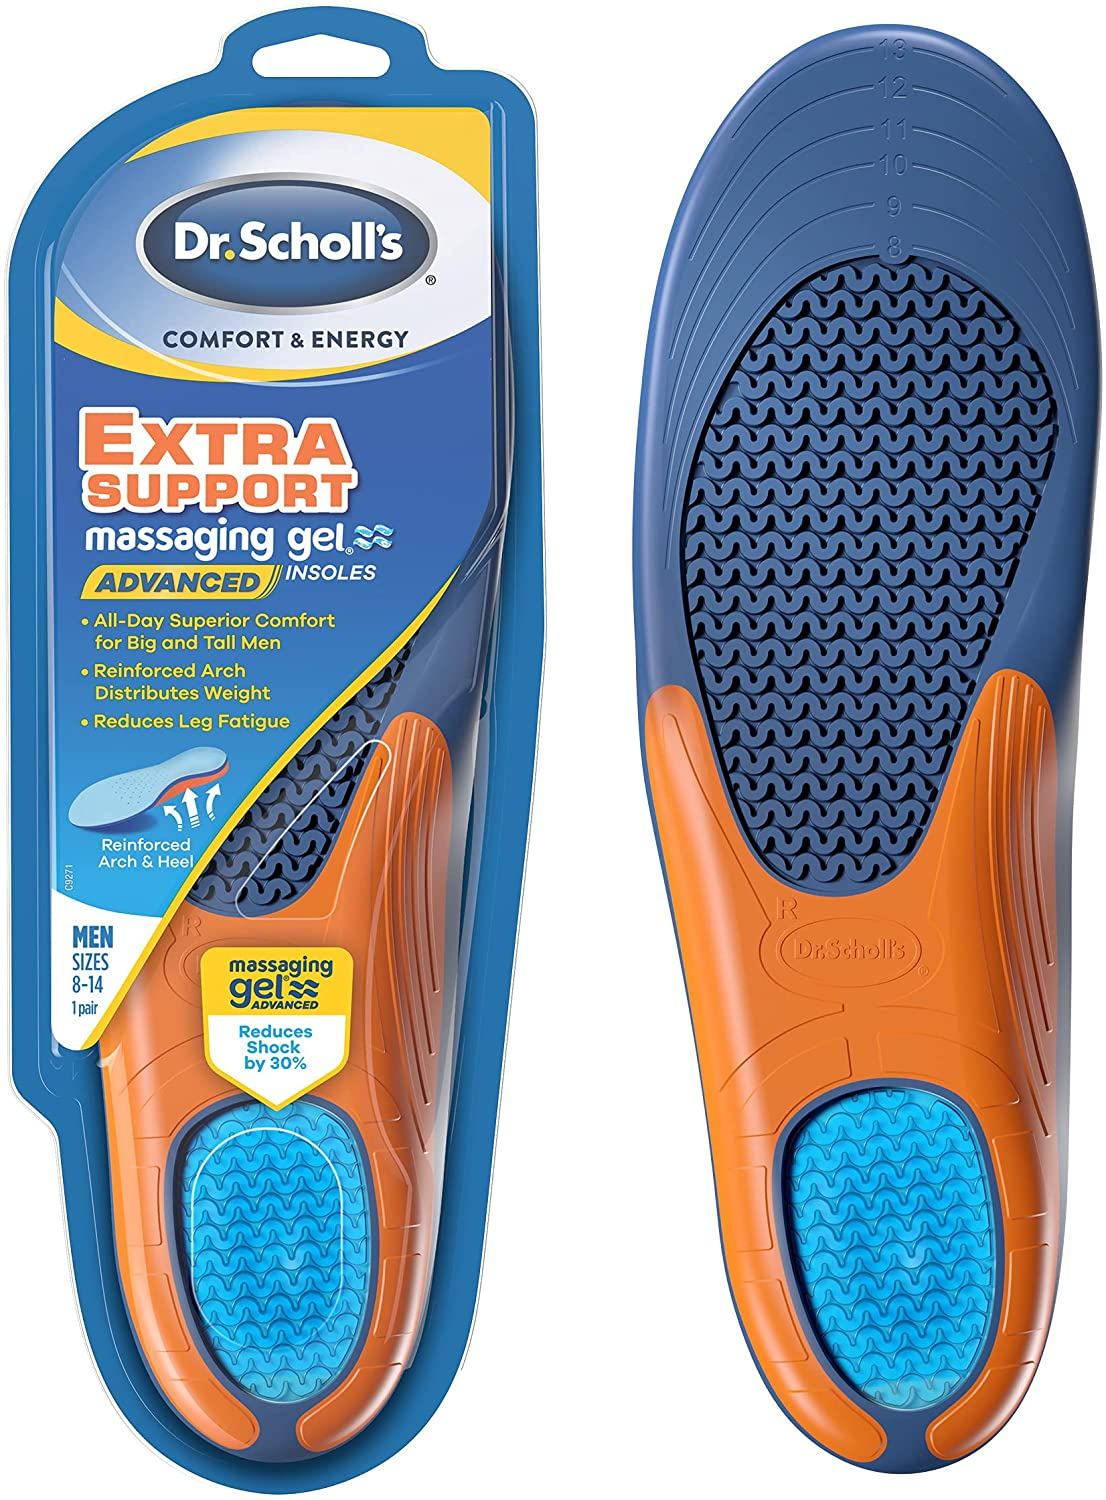 Buy Dr. Scholl's Top Products at Best Prices online | lazada.com.ph